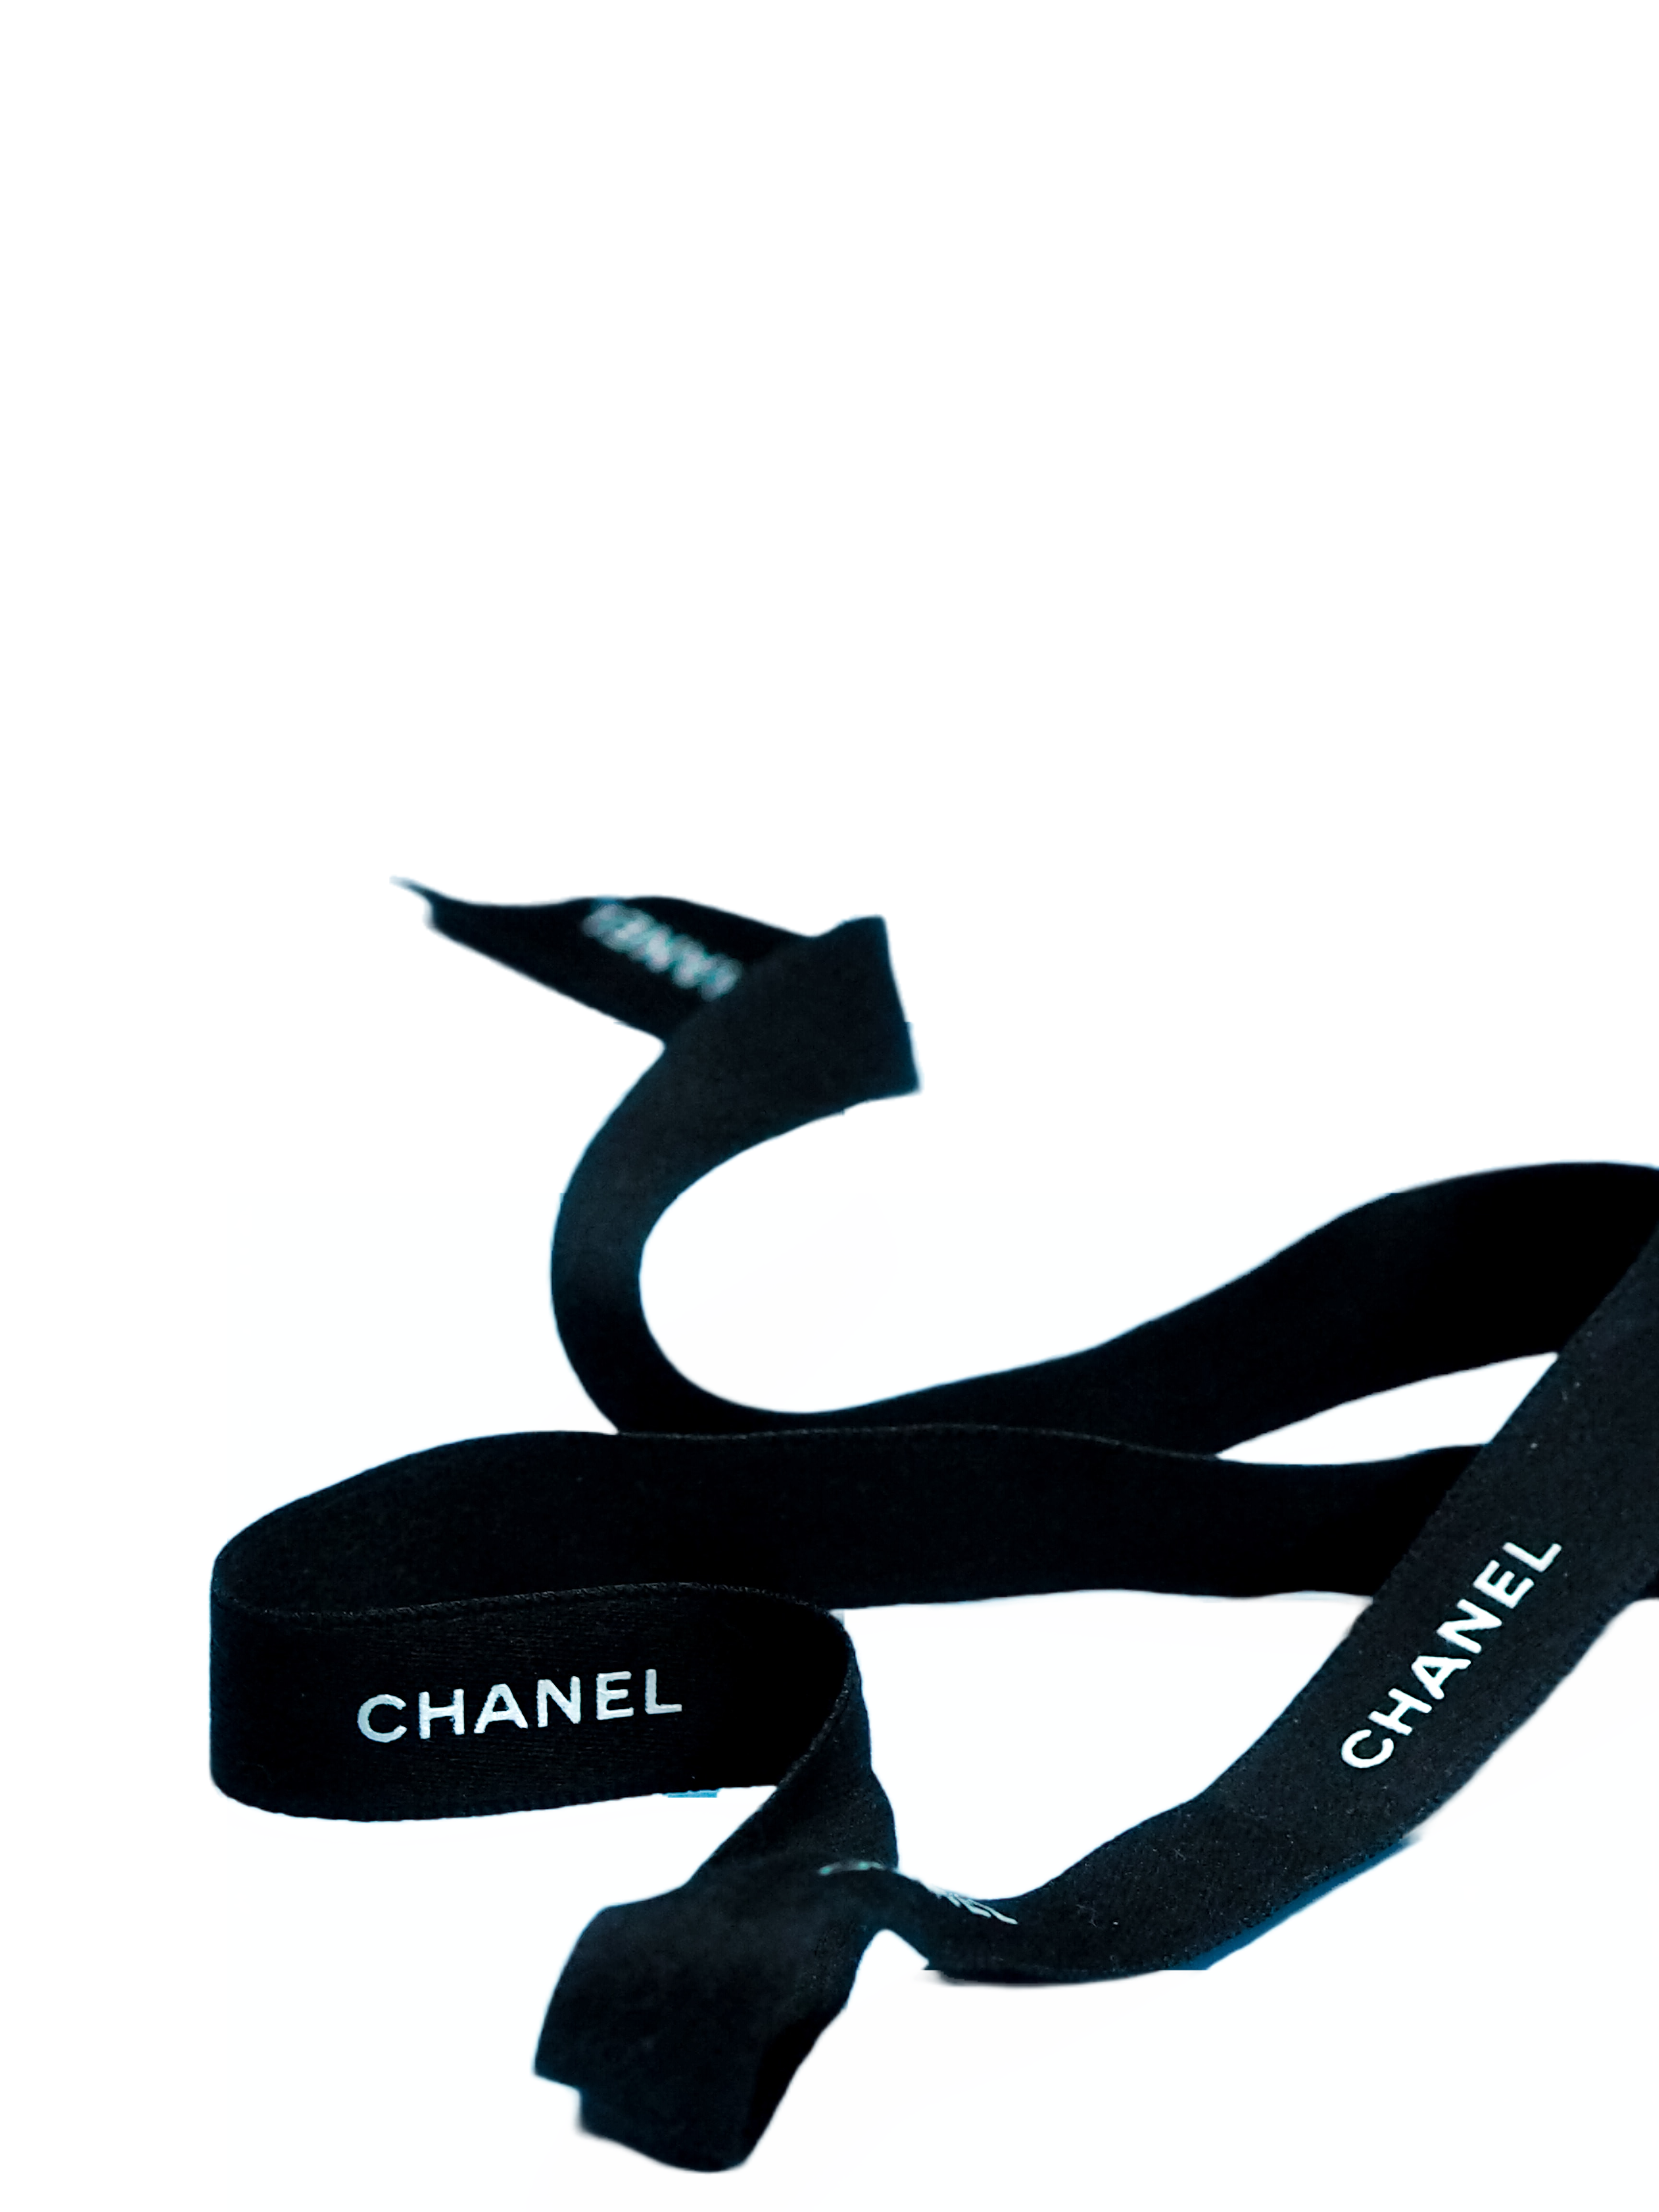 This is a chanel ribbon. Our business sells chanel bags.